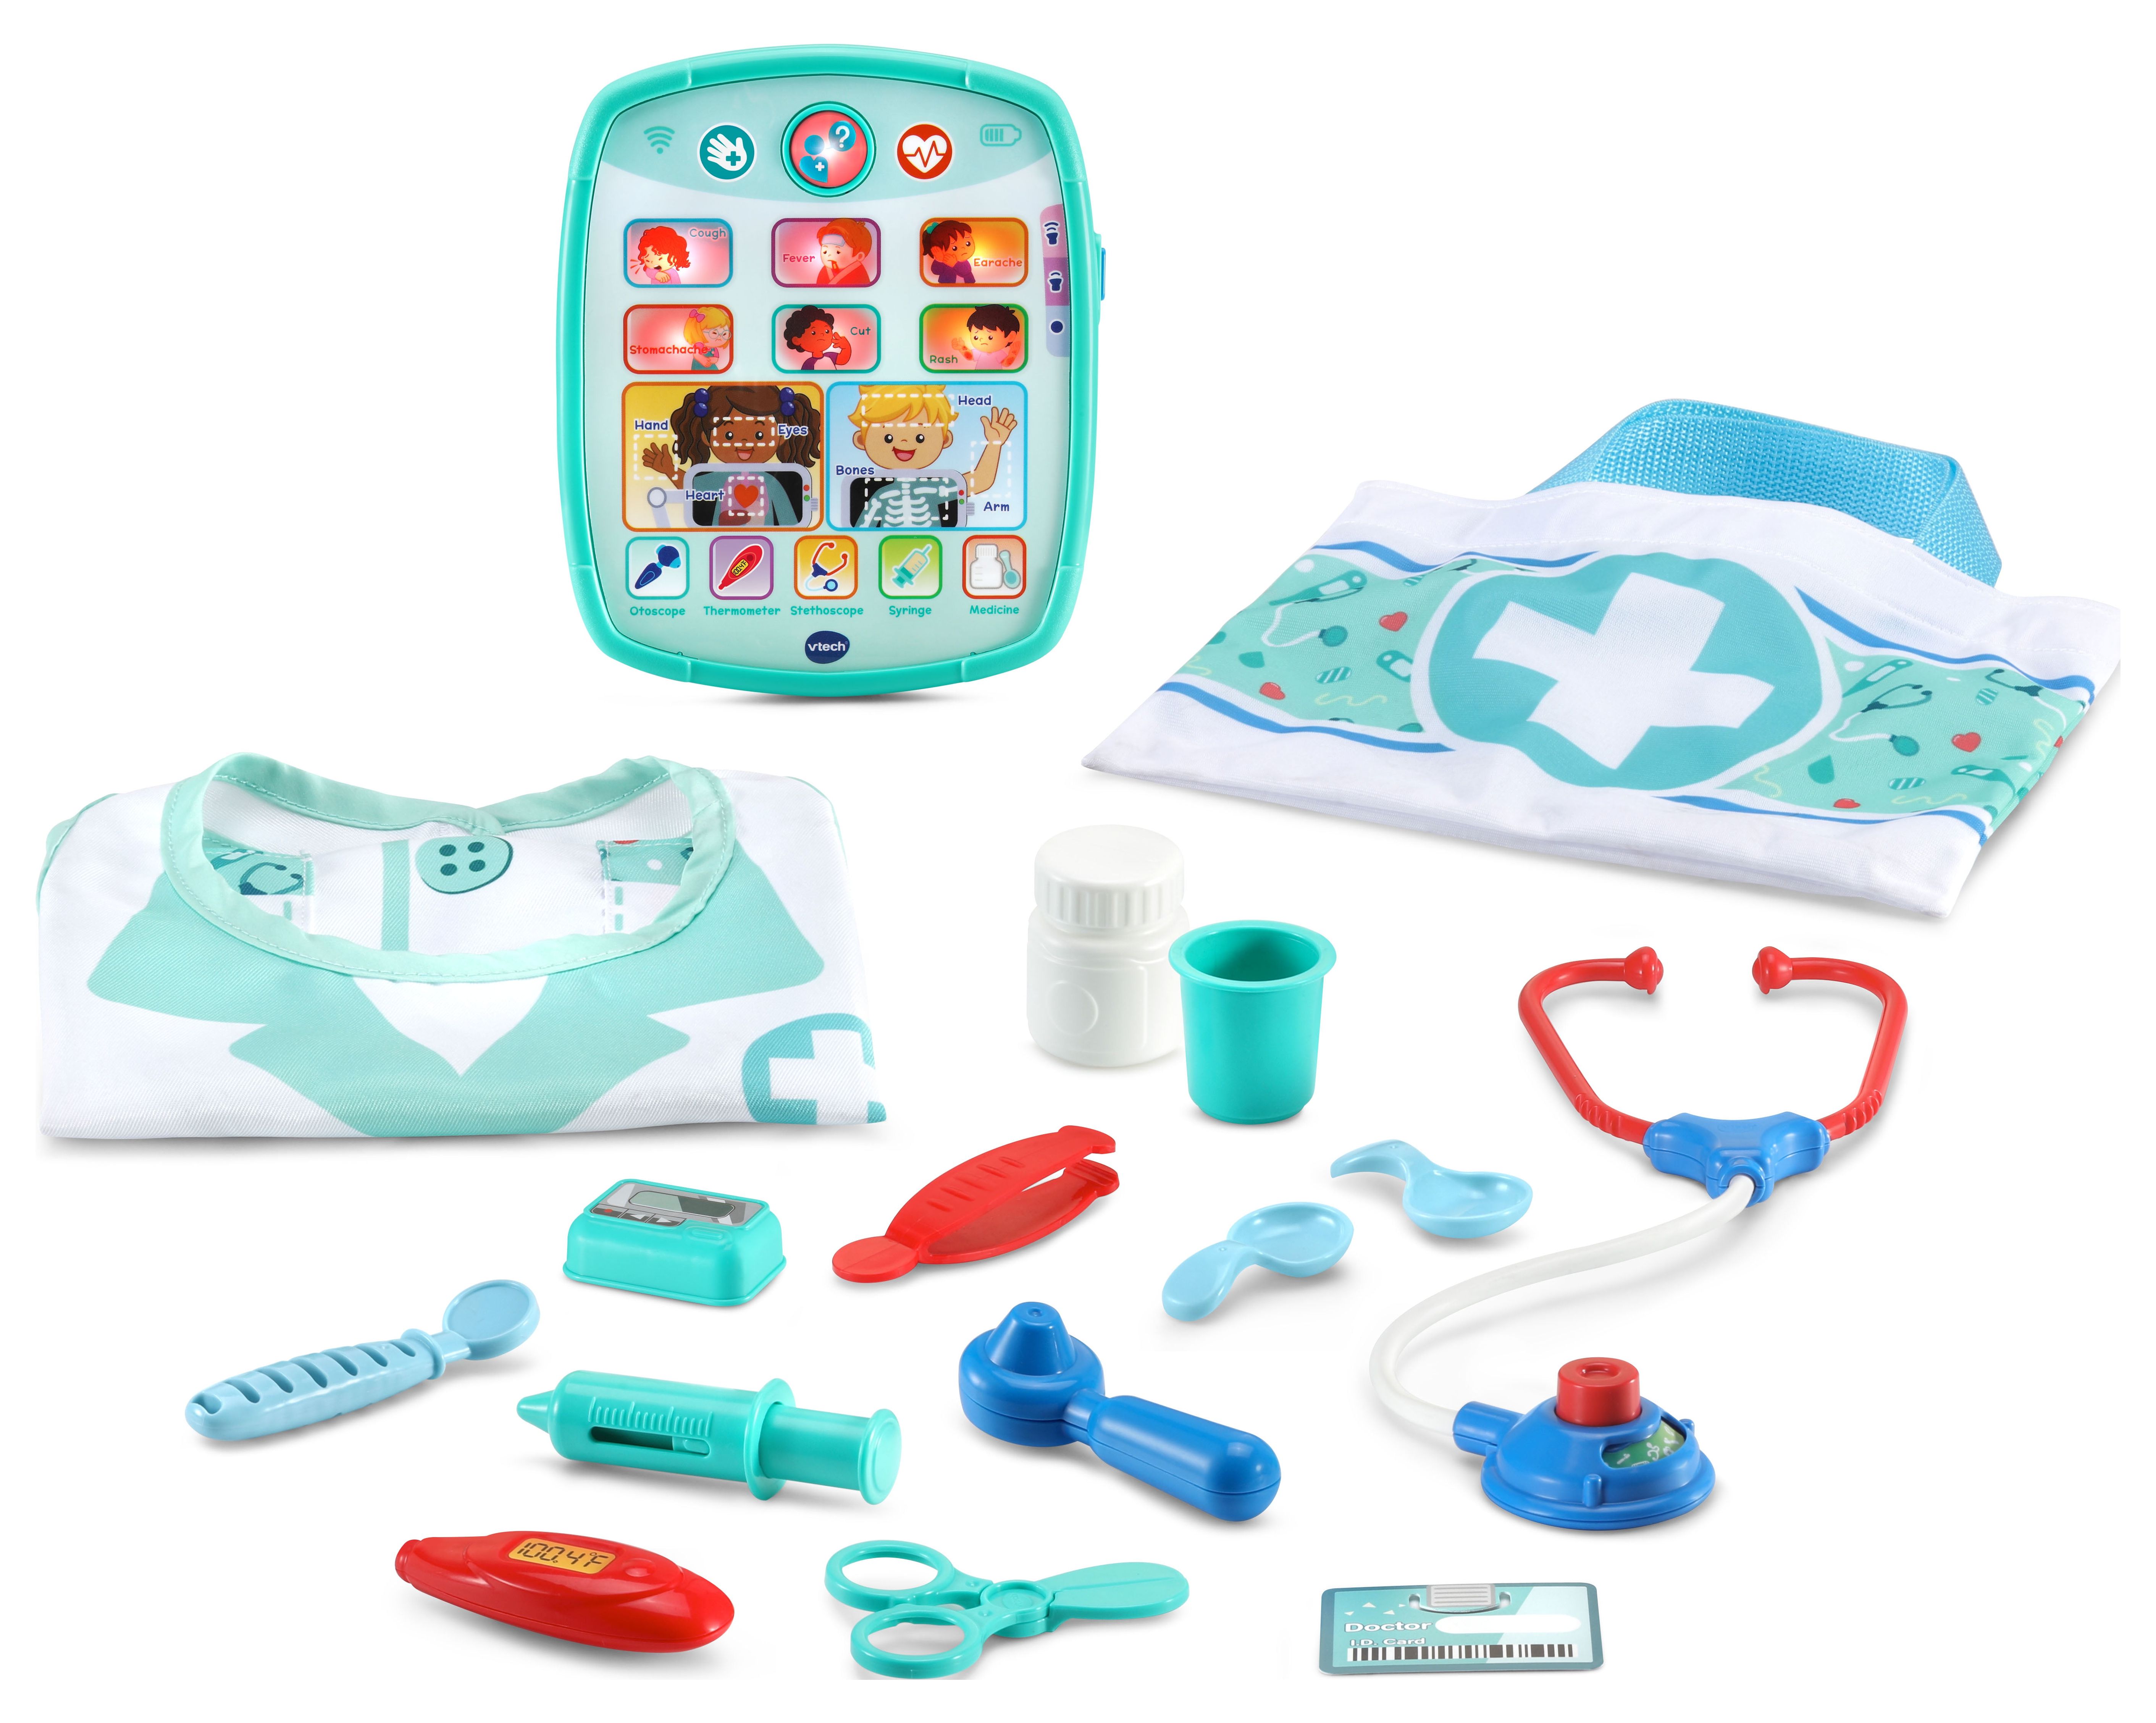 VTech® Smart Chart Medical Kit™ With Healthcare Tablet and Accessories - image 1 of 9